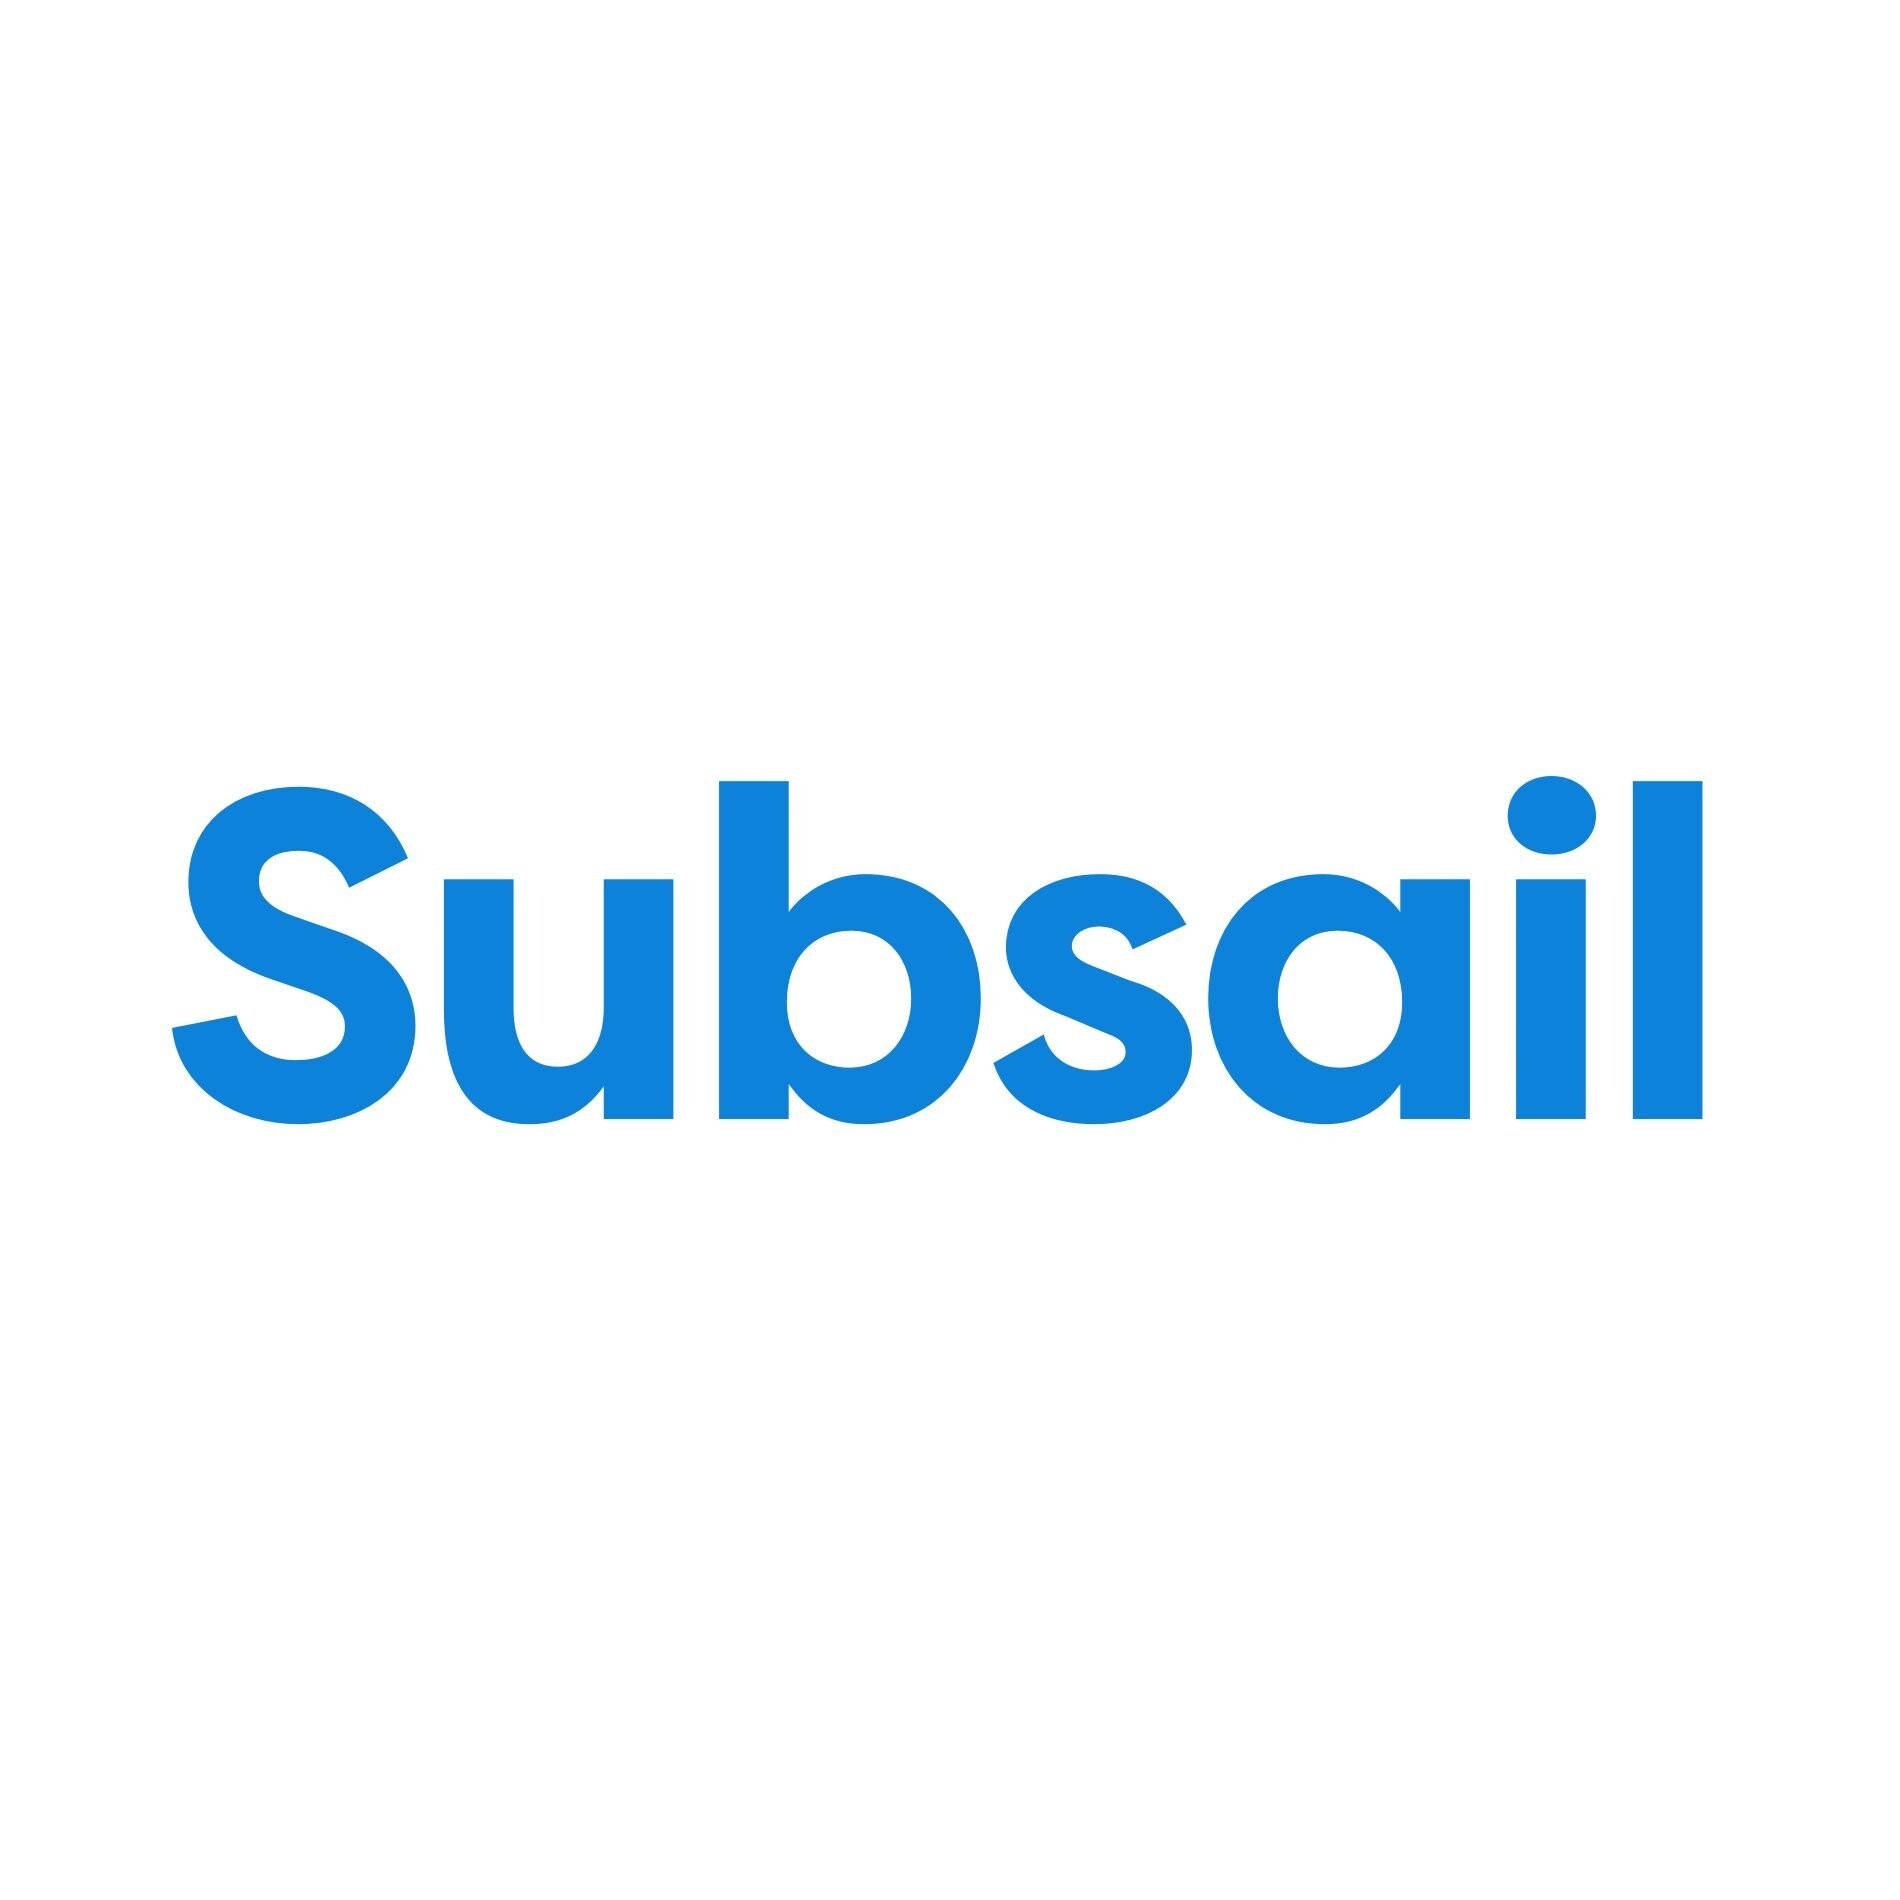 Subsail